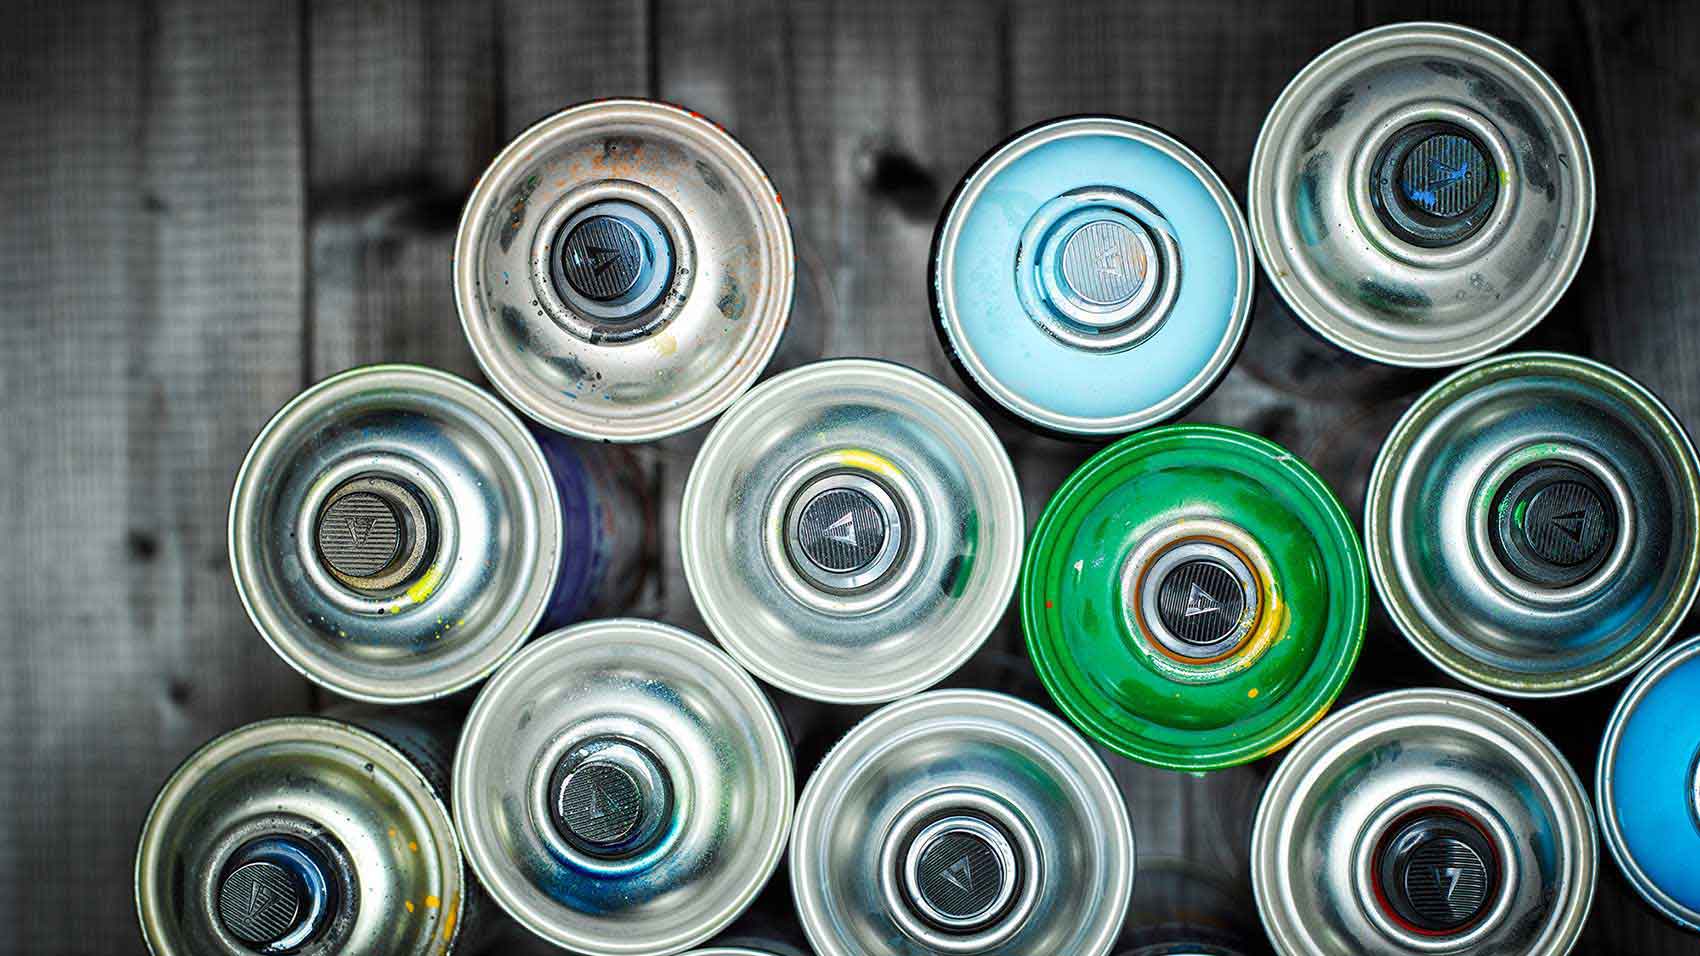 SC Johnson's product recycling program helped waste workers sort recycling and separate aerosol cans from other materials.